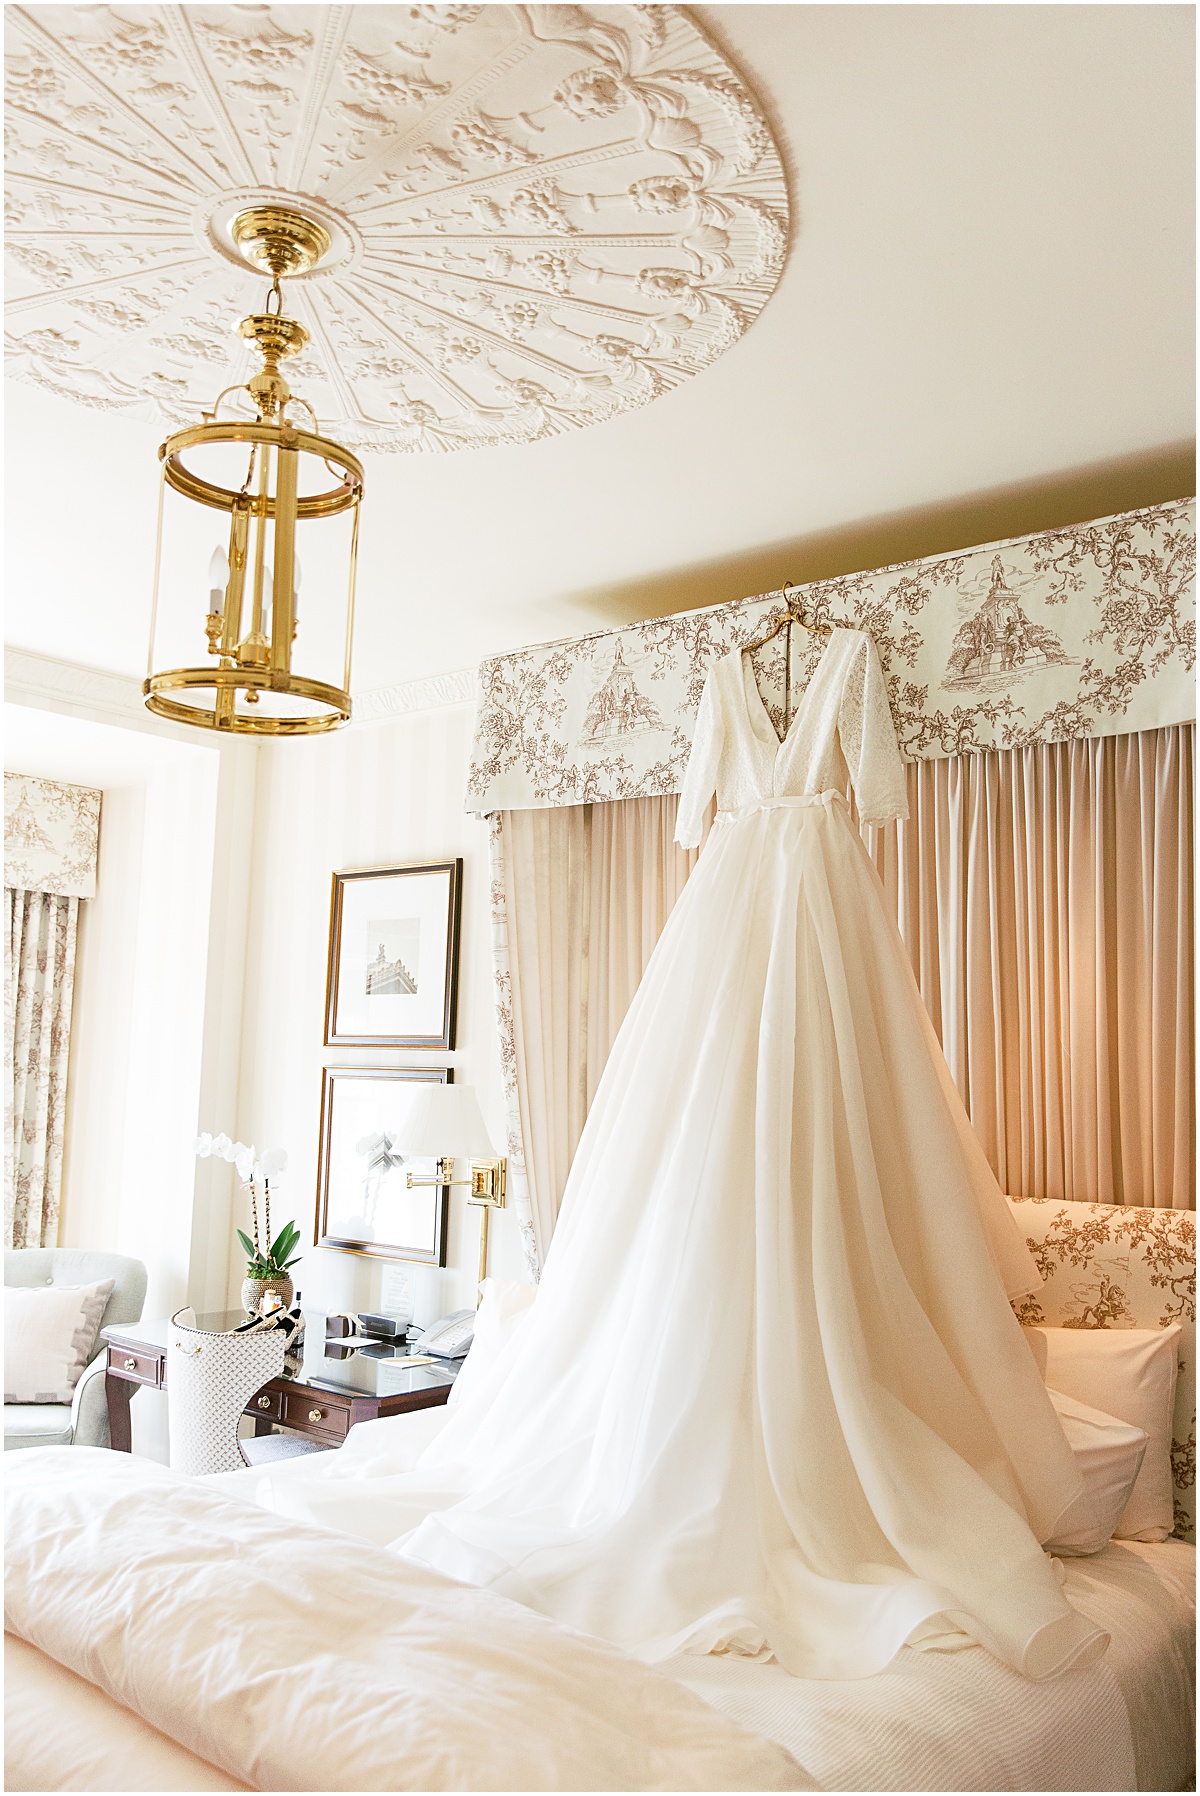 Hay-Adams Hotel | The 10 Best DC Hotels for  Getting Ready on Your Wedding Day